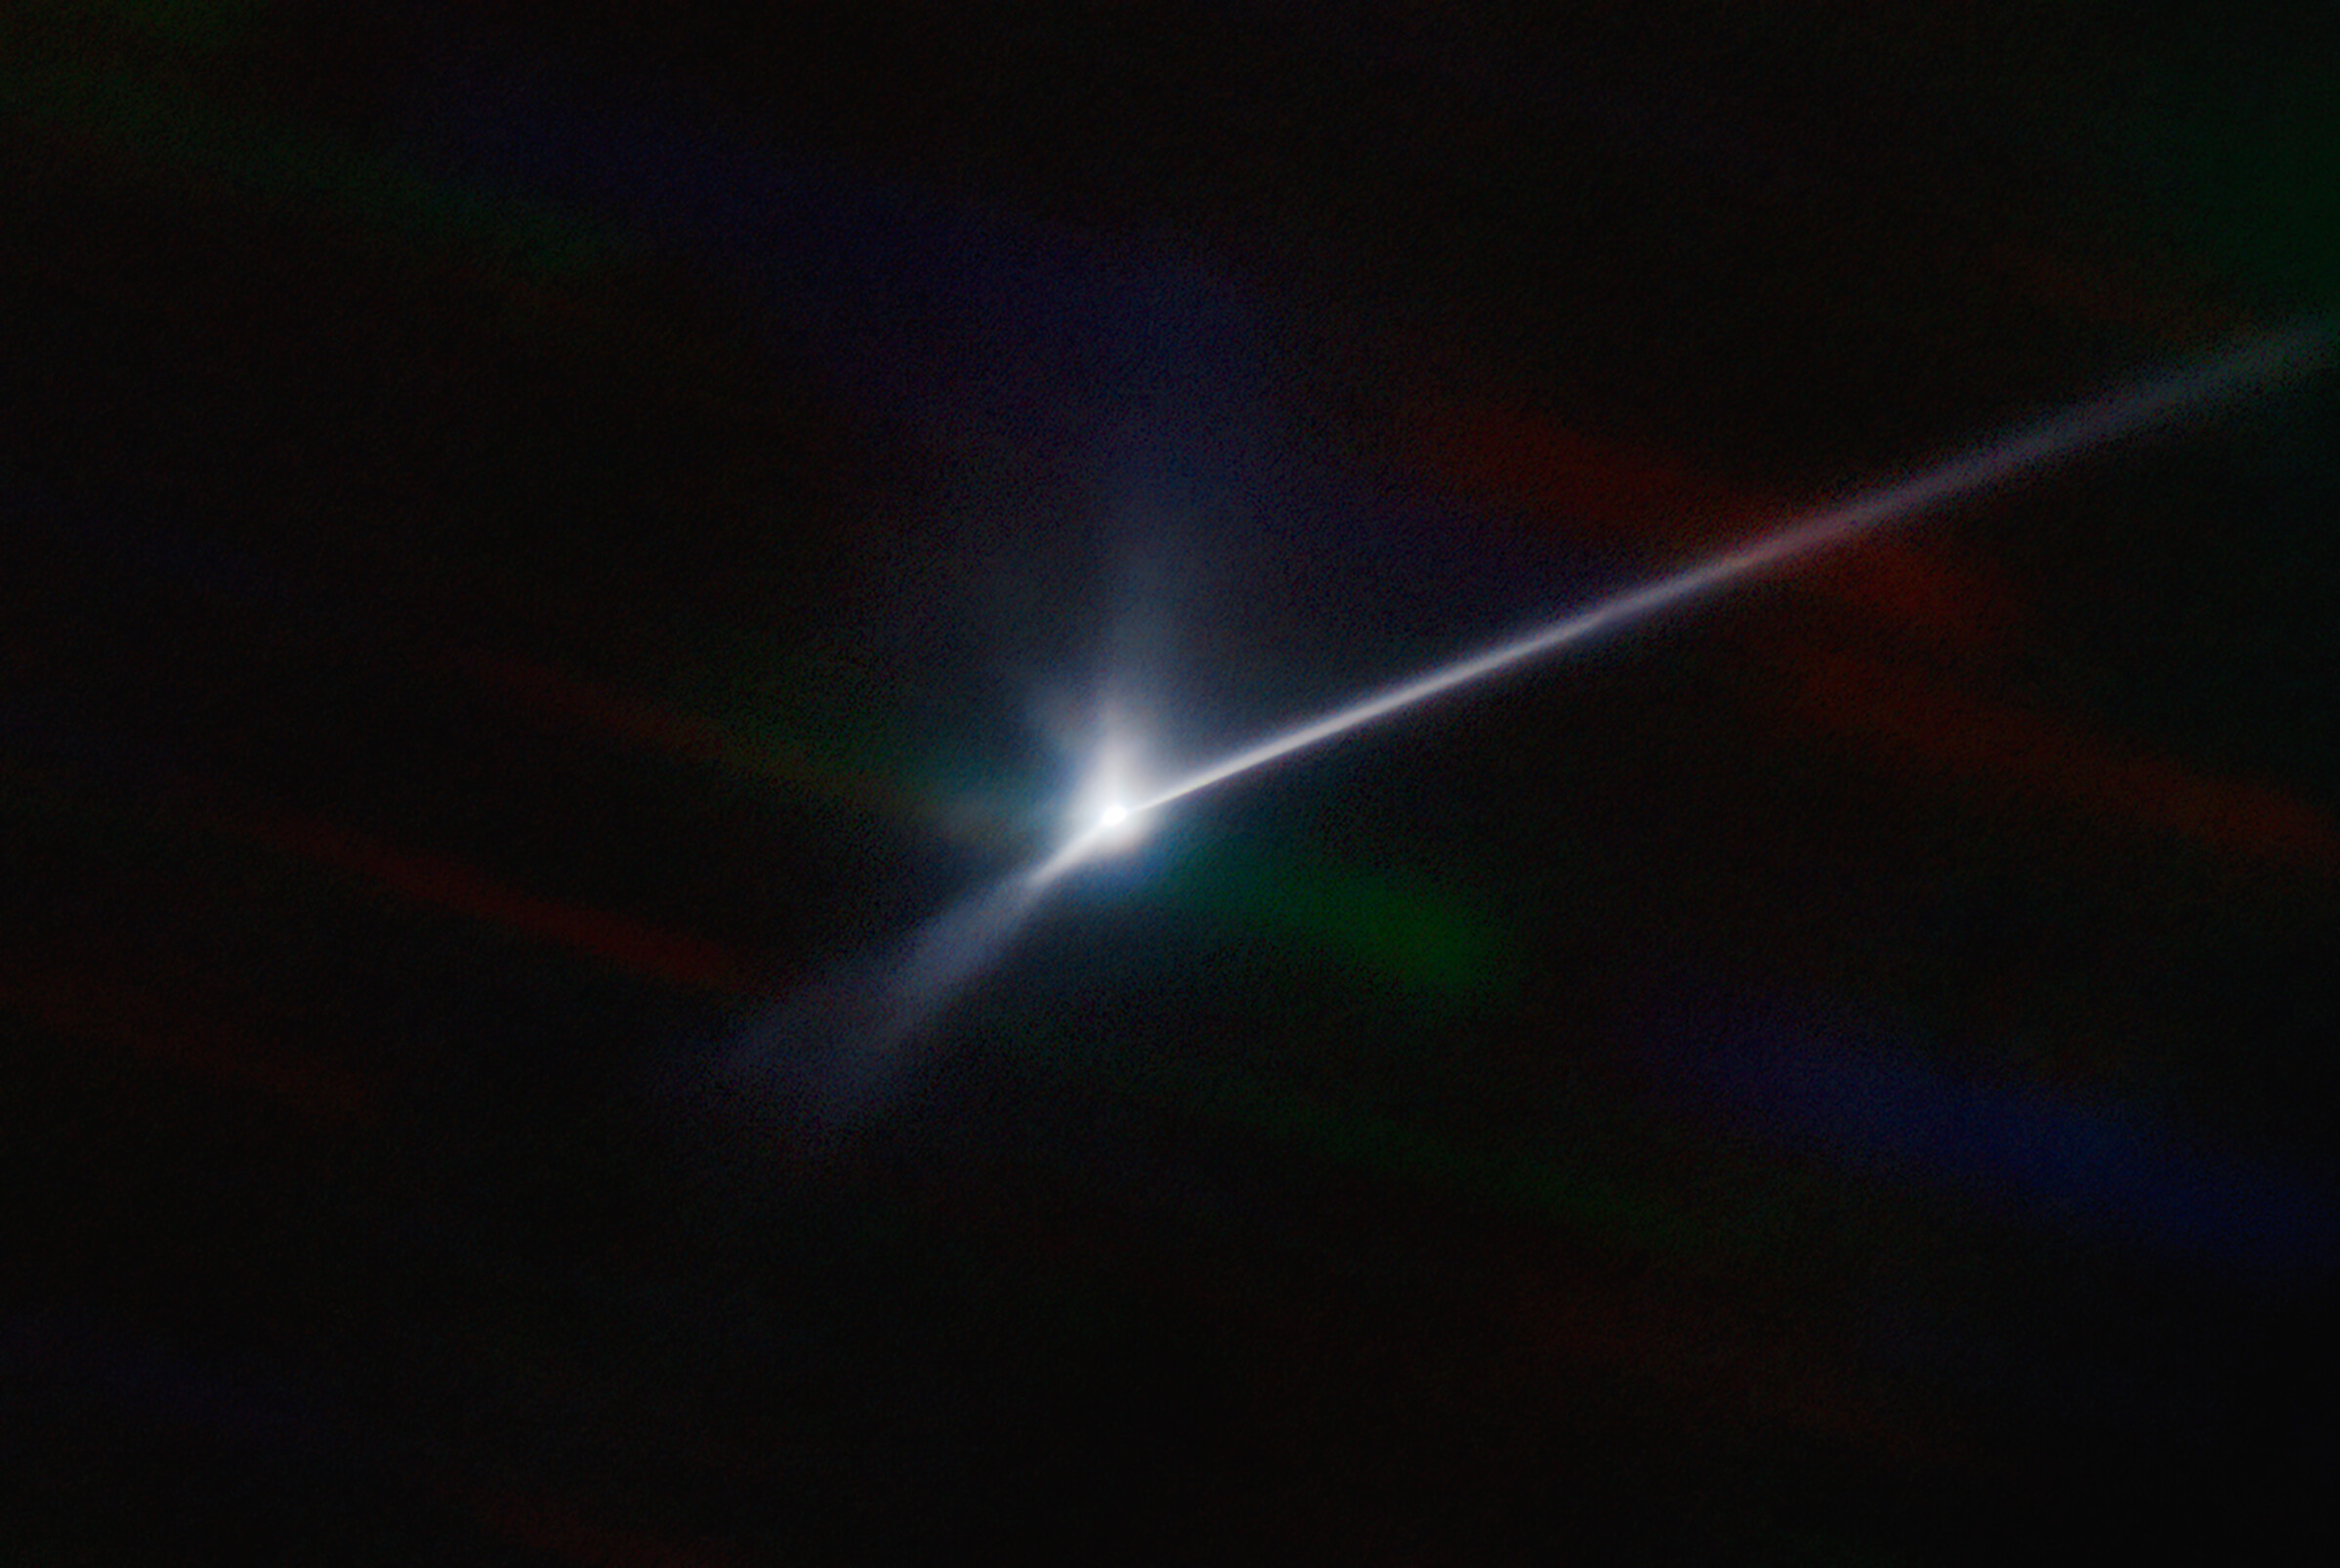 Aftermath of DART collision with Dimorphos, captured by SOAR telescope. Tail visible as long white streak against black space.